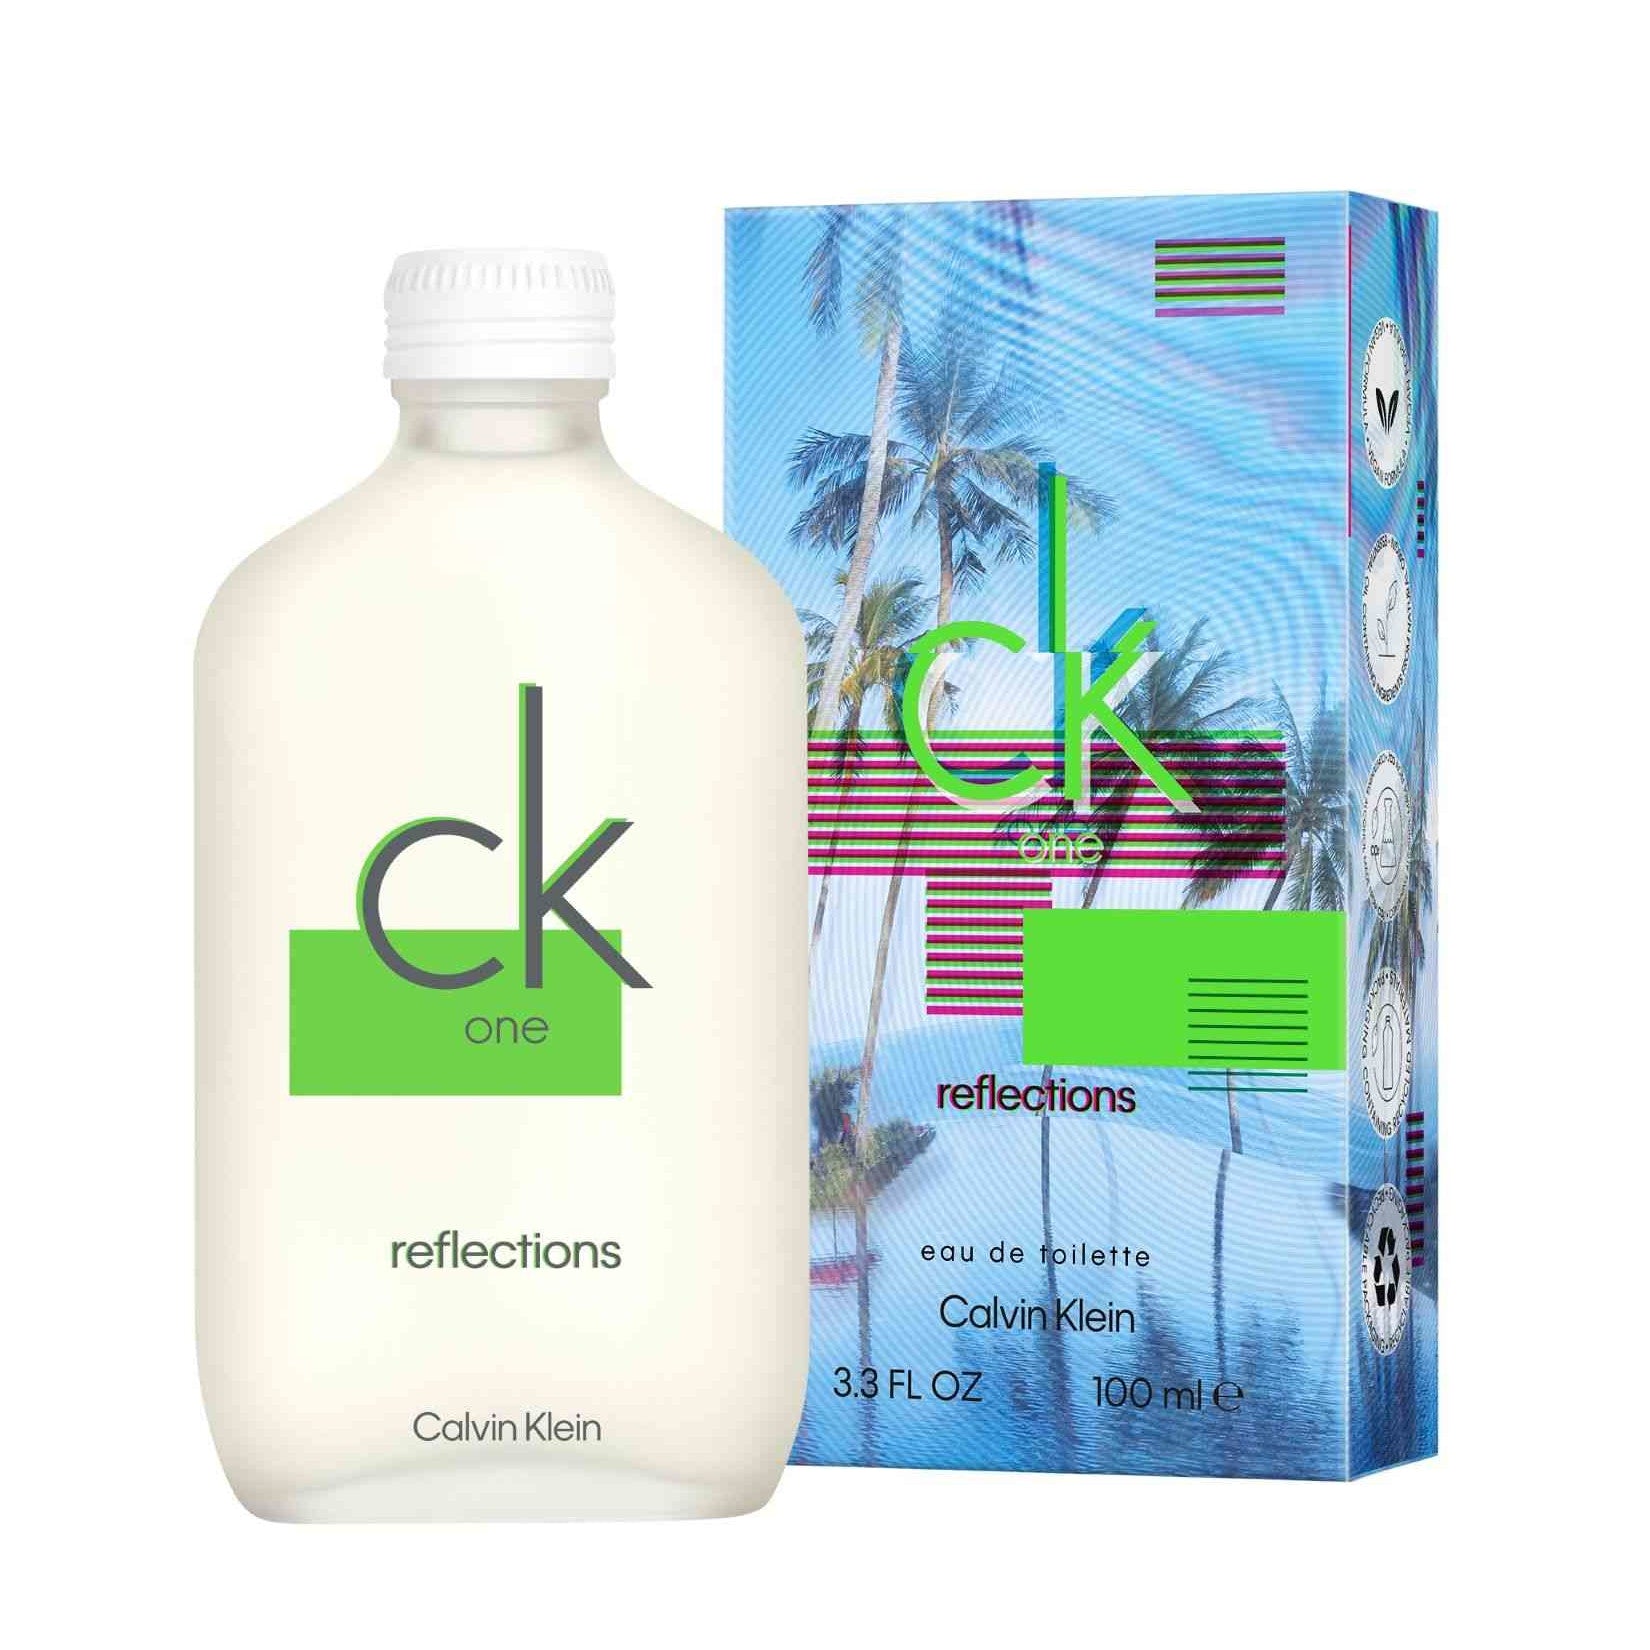 Calvin Klein Ck One for Men - Notes of Green Tea, Rose, Amber and Nature